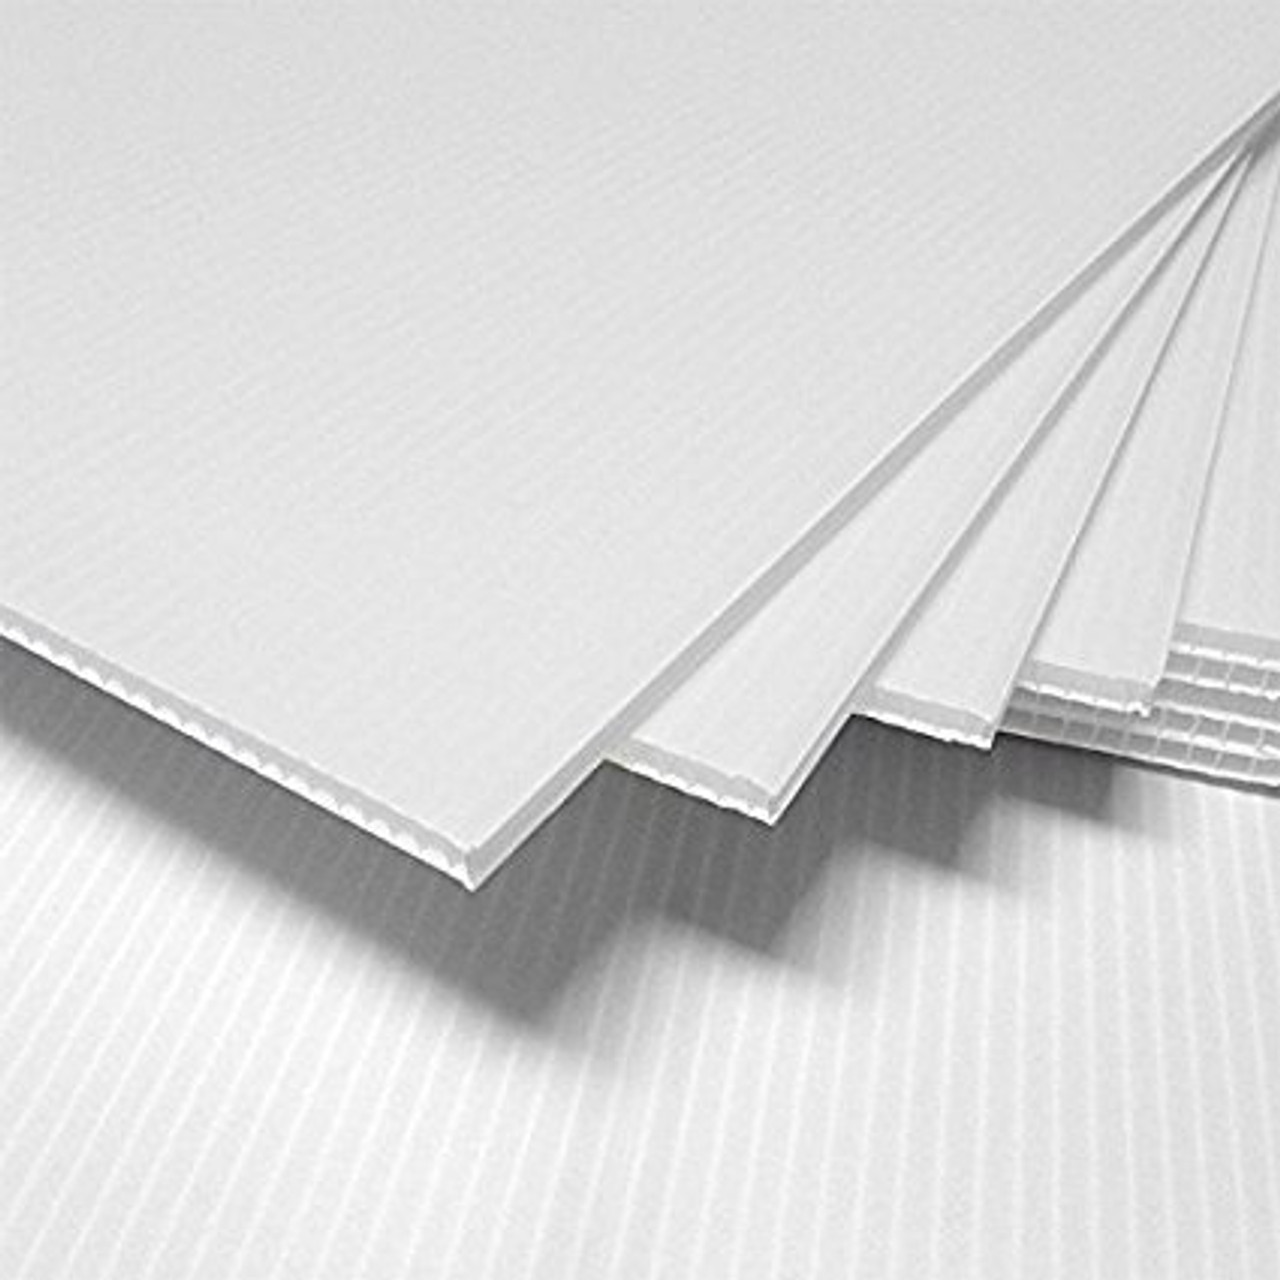 Corrugated Paper Sheets 5pcs 27-inch x 20-inch White Cardboard for DIY Craft